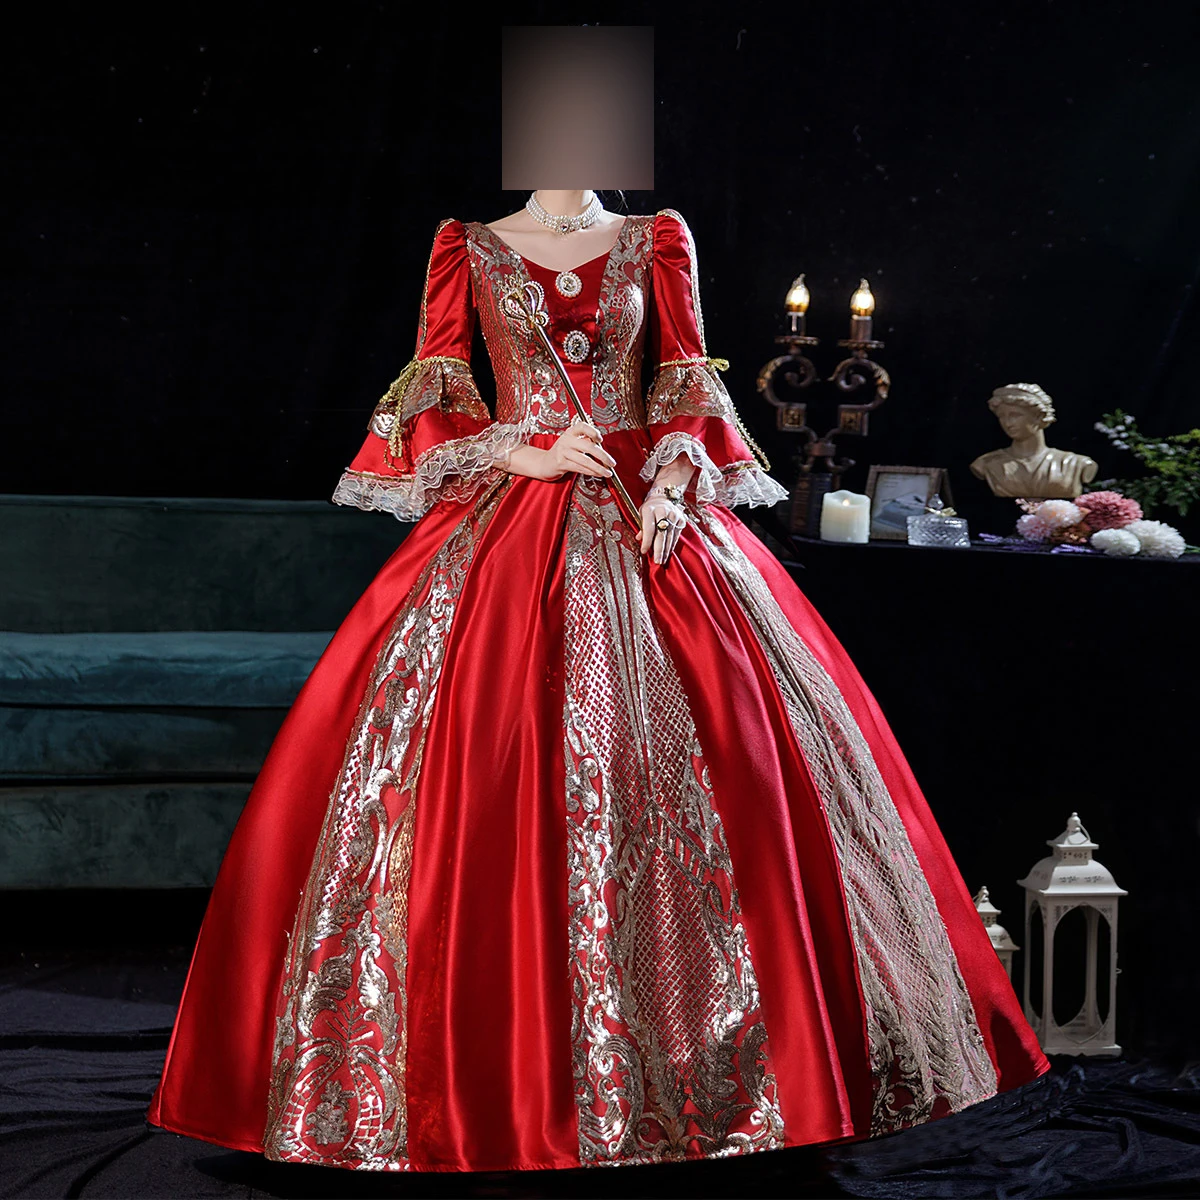 GUXQD Rococo Marie Antoinette Renaissance Vintage Victorian Style Period Princess Fantasy Dresses Christmas Masquerade Ball Gown